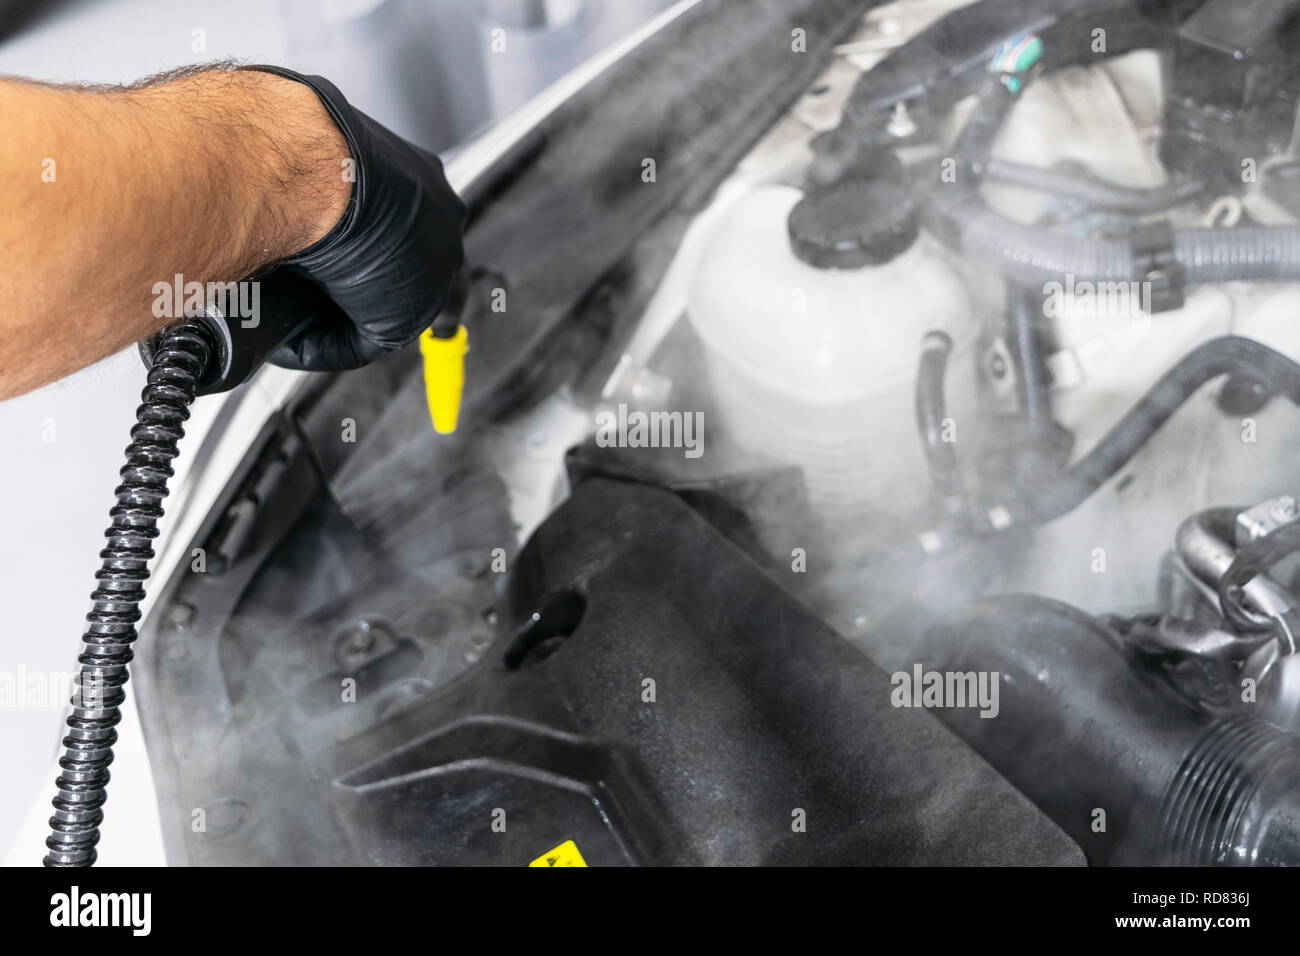 Car detailing. Car washing cleaning engine. Cleaning car engine using hot steam. Hot steam engine washing. Soft lighting. Car wash station worker clea Stock Photo